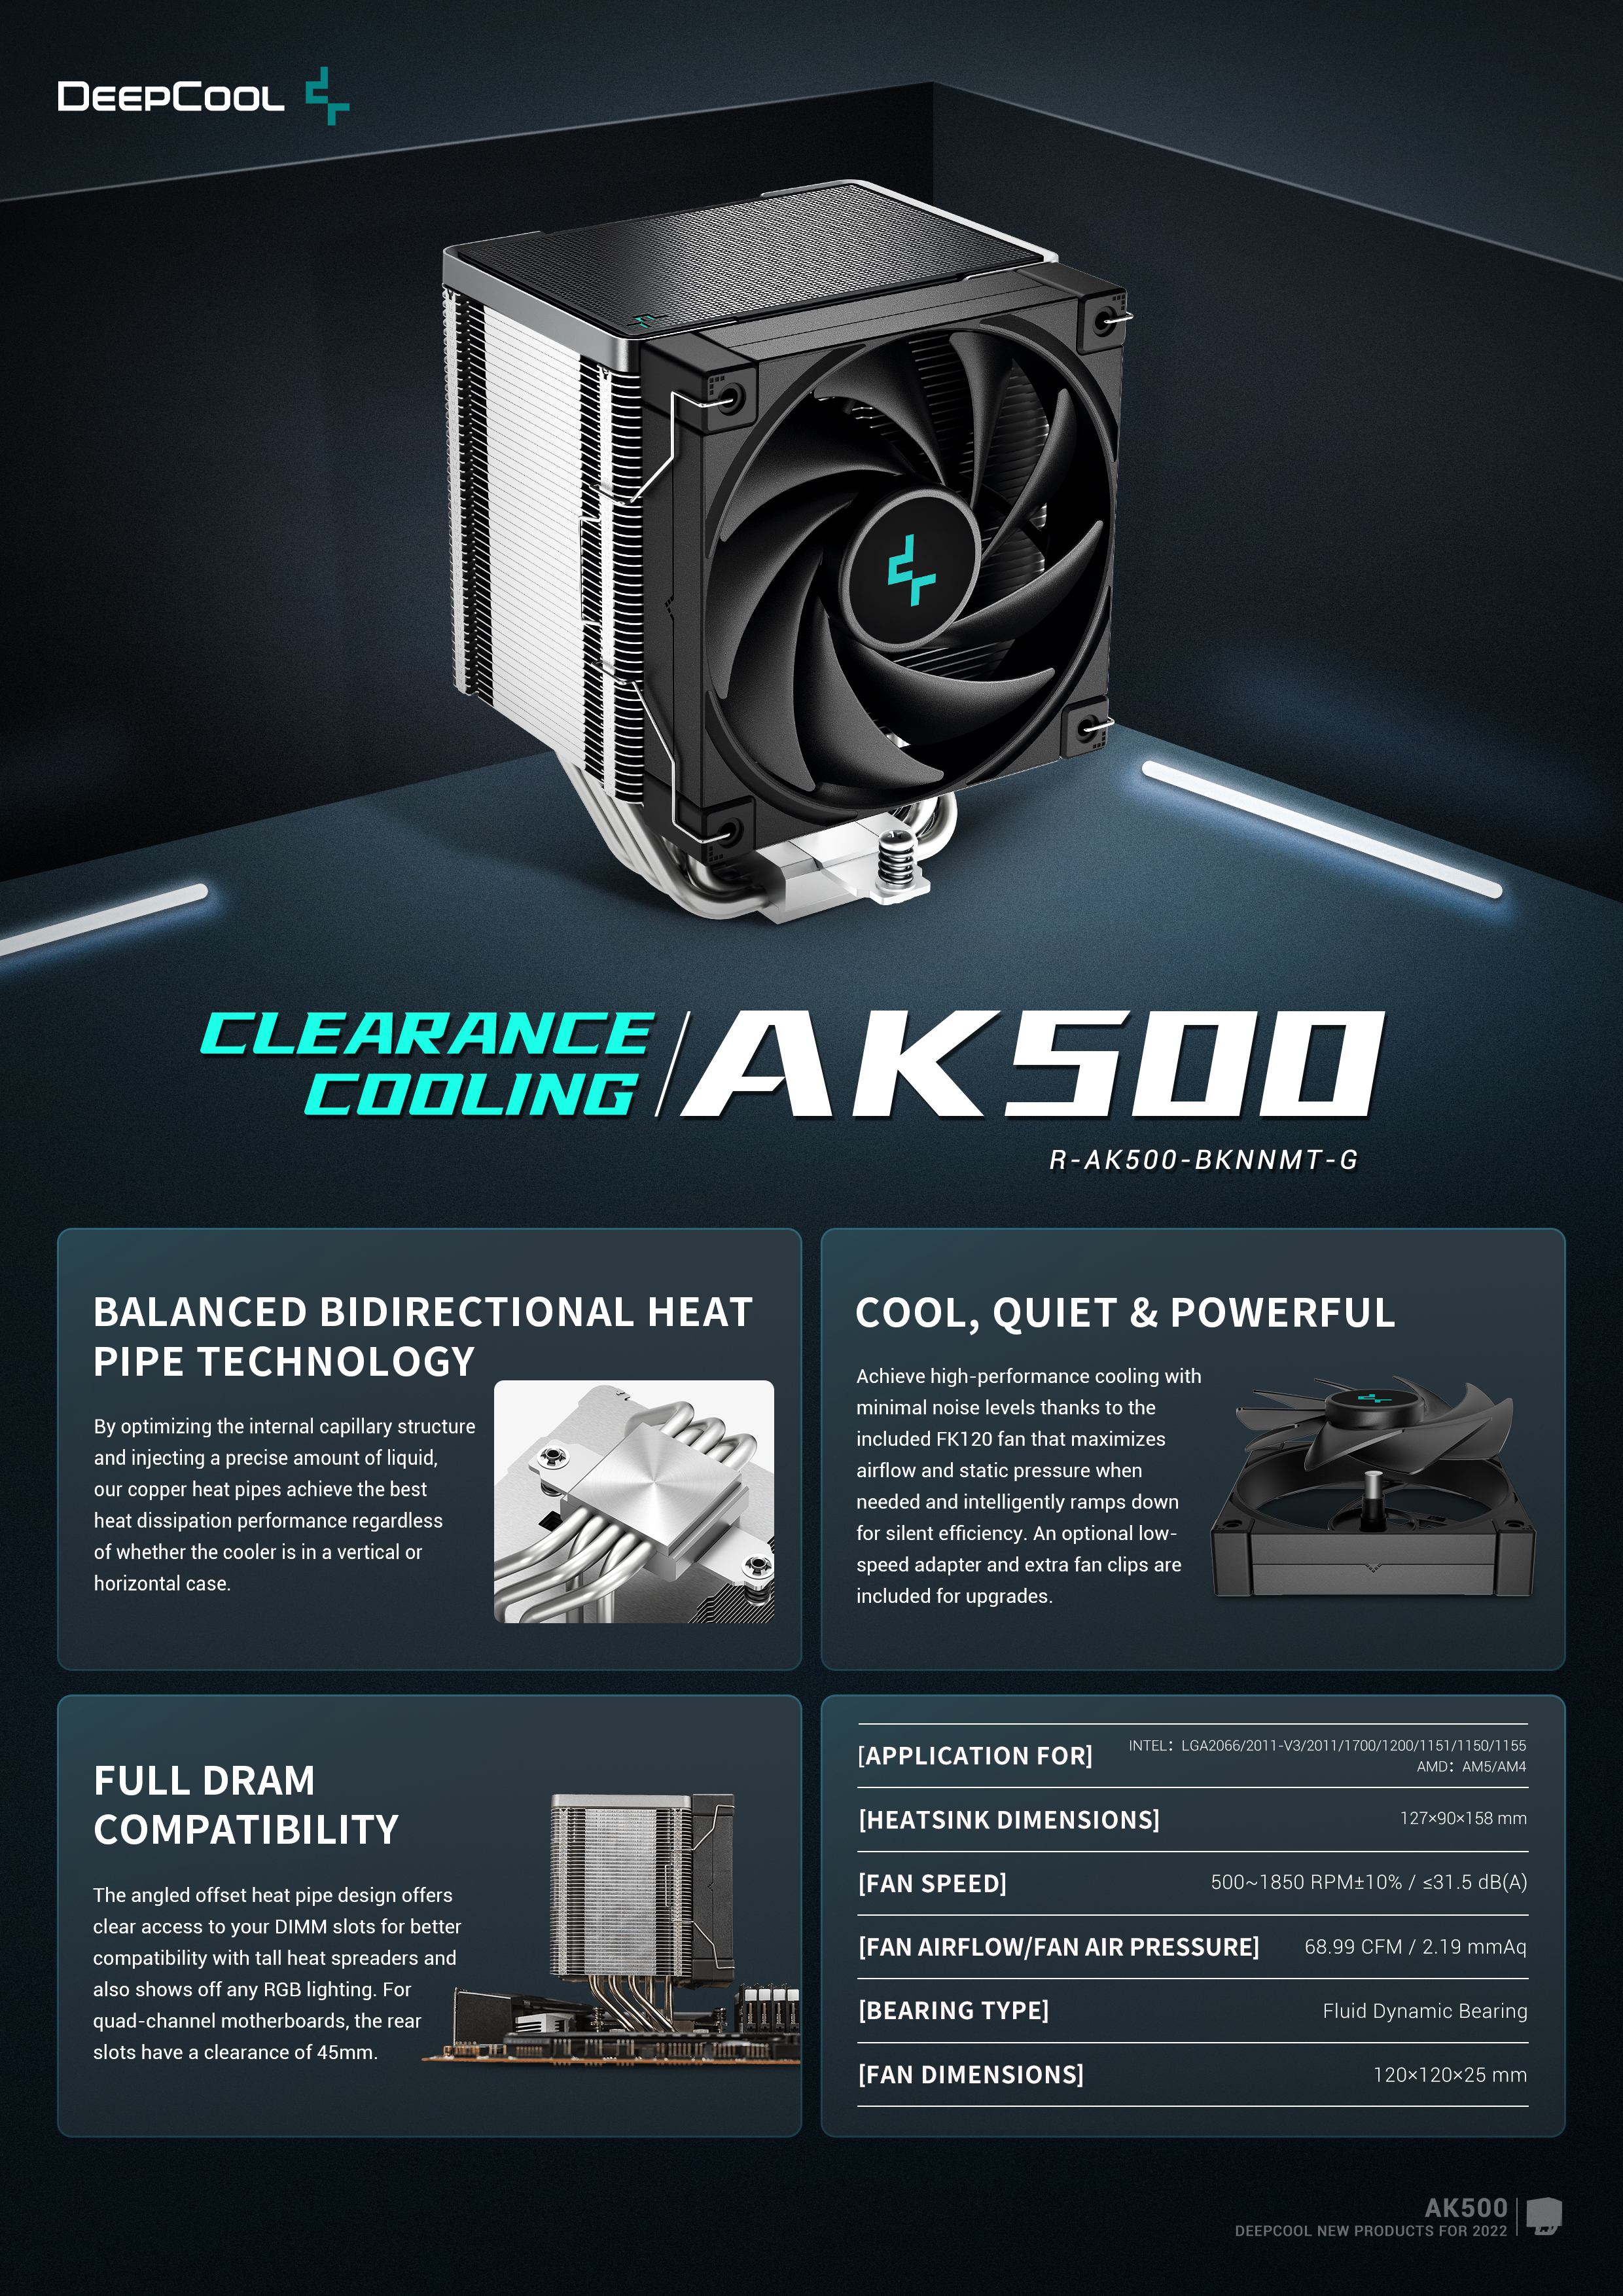 A large marketing image providing additional information about the product DeepCool AK500 CPU Cooler - Black - Additional alt info not provided